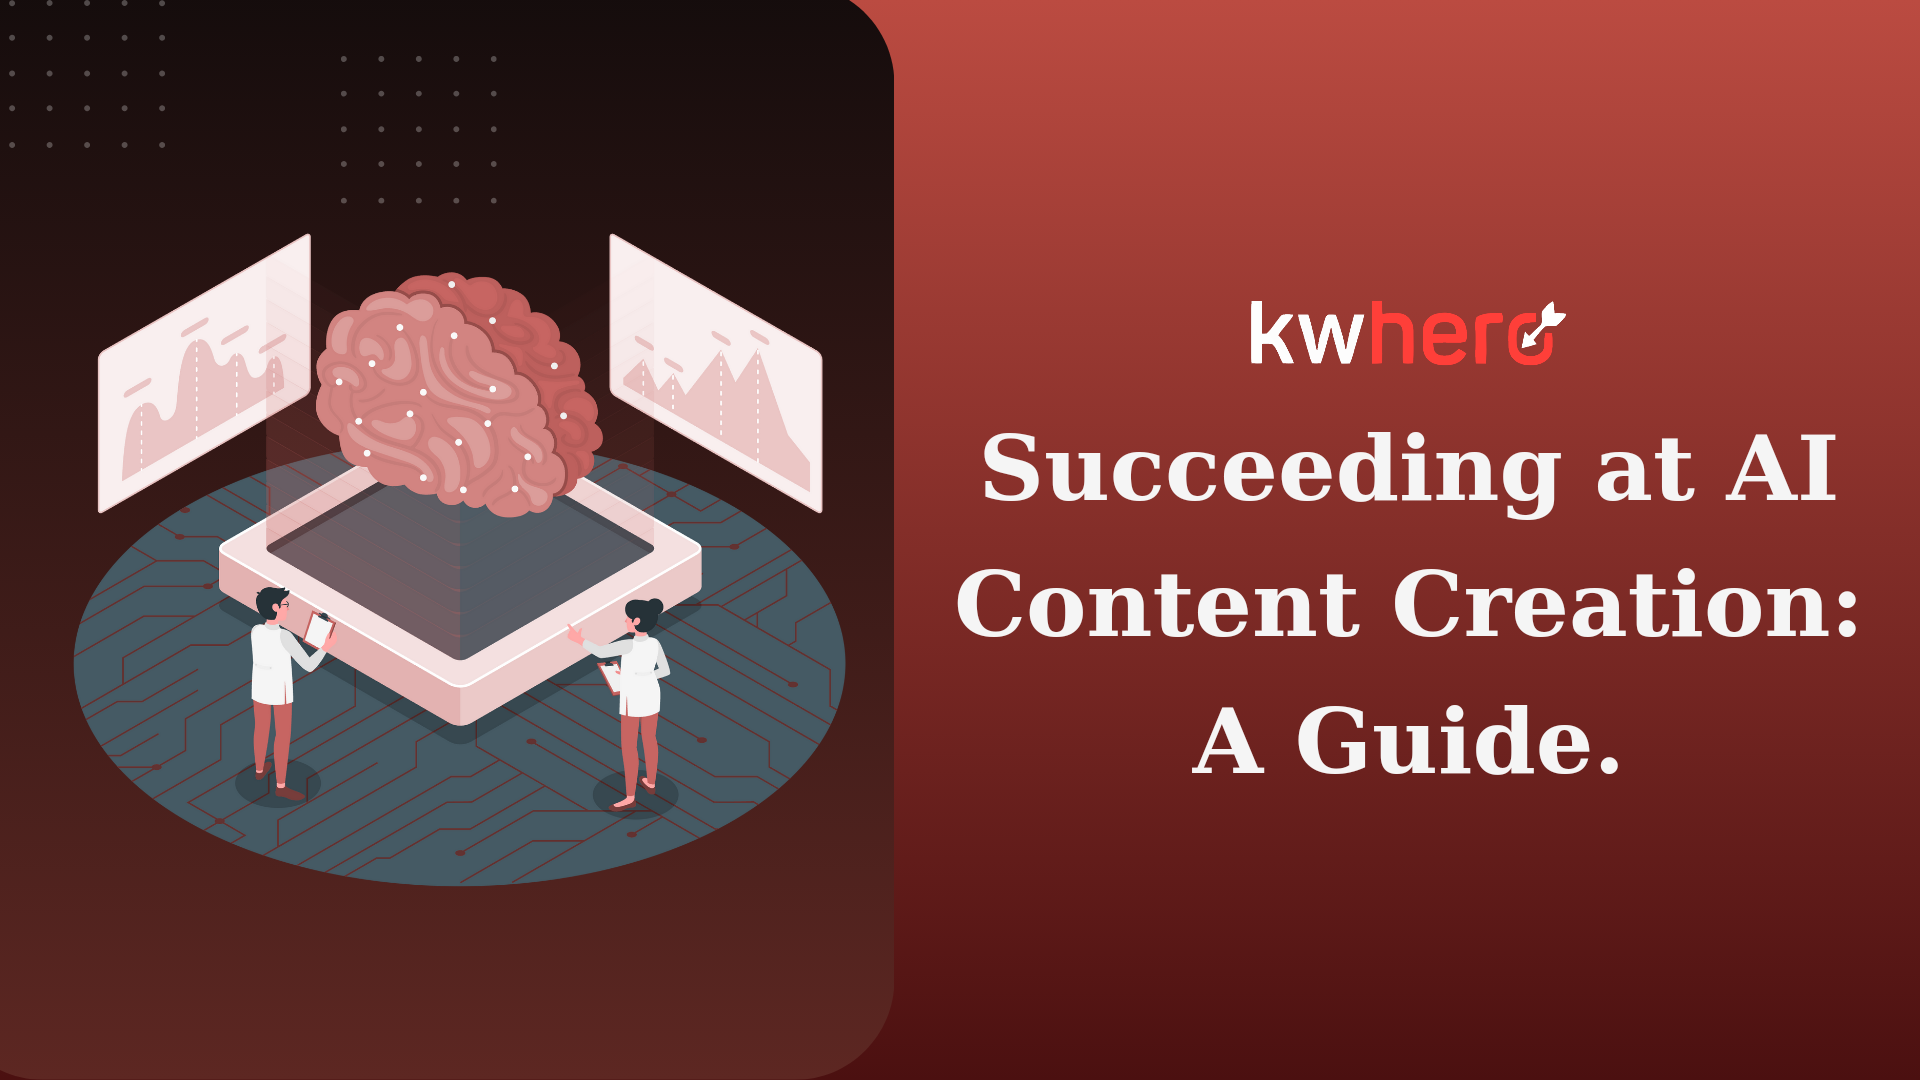 Featured image for an article about succeeding at AI content creation with KWHero.